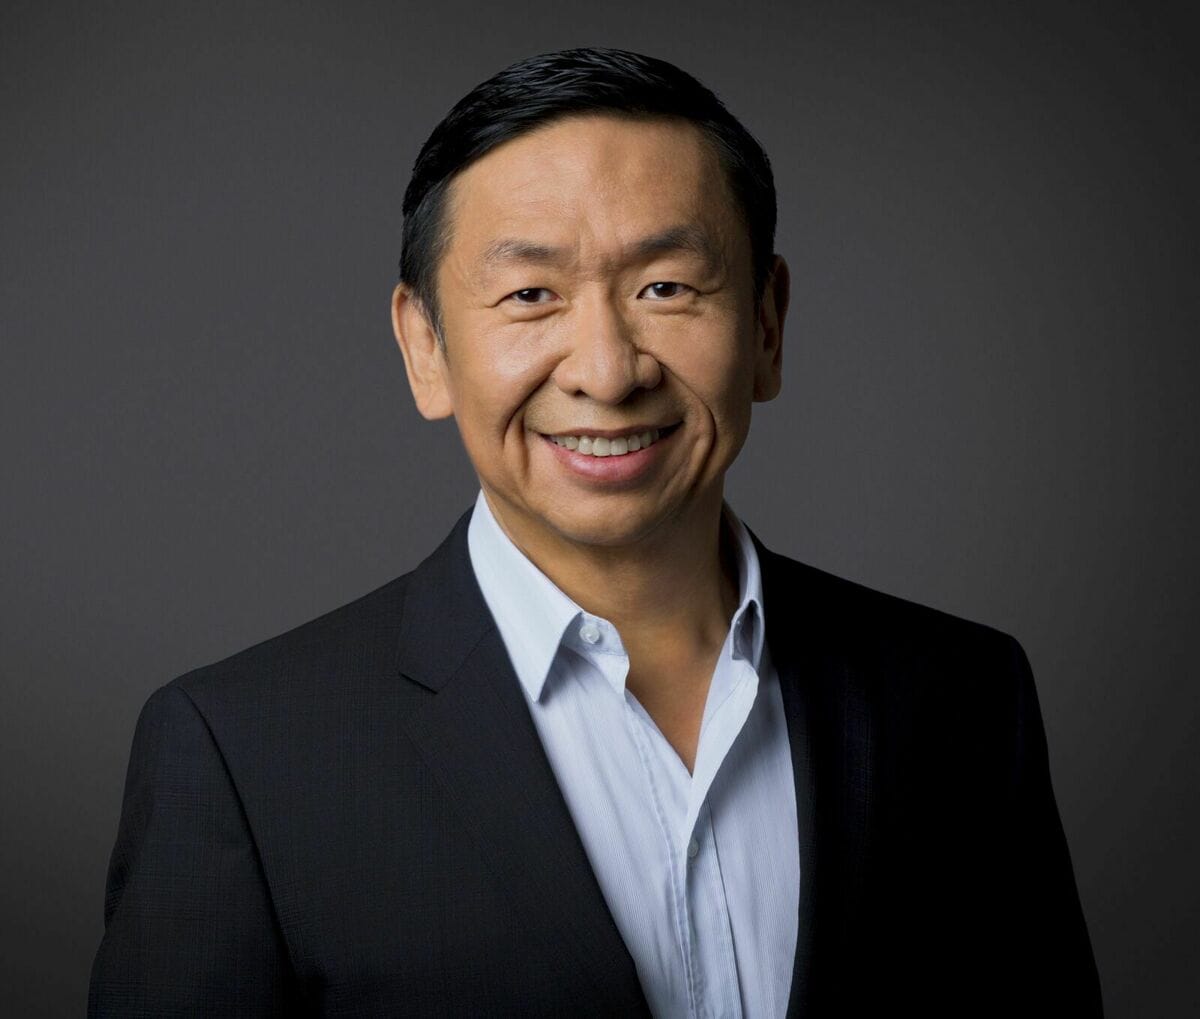 William Wang - Famous Businessperson